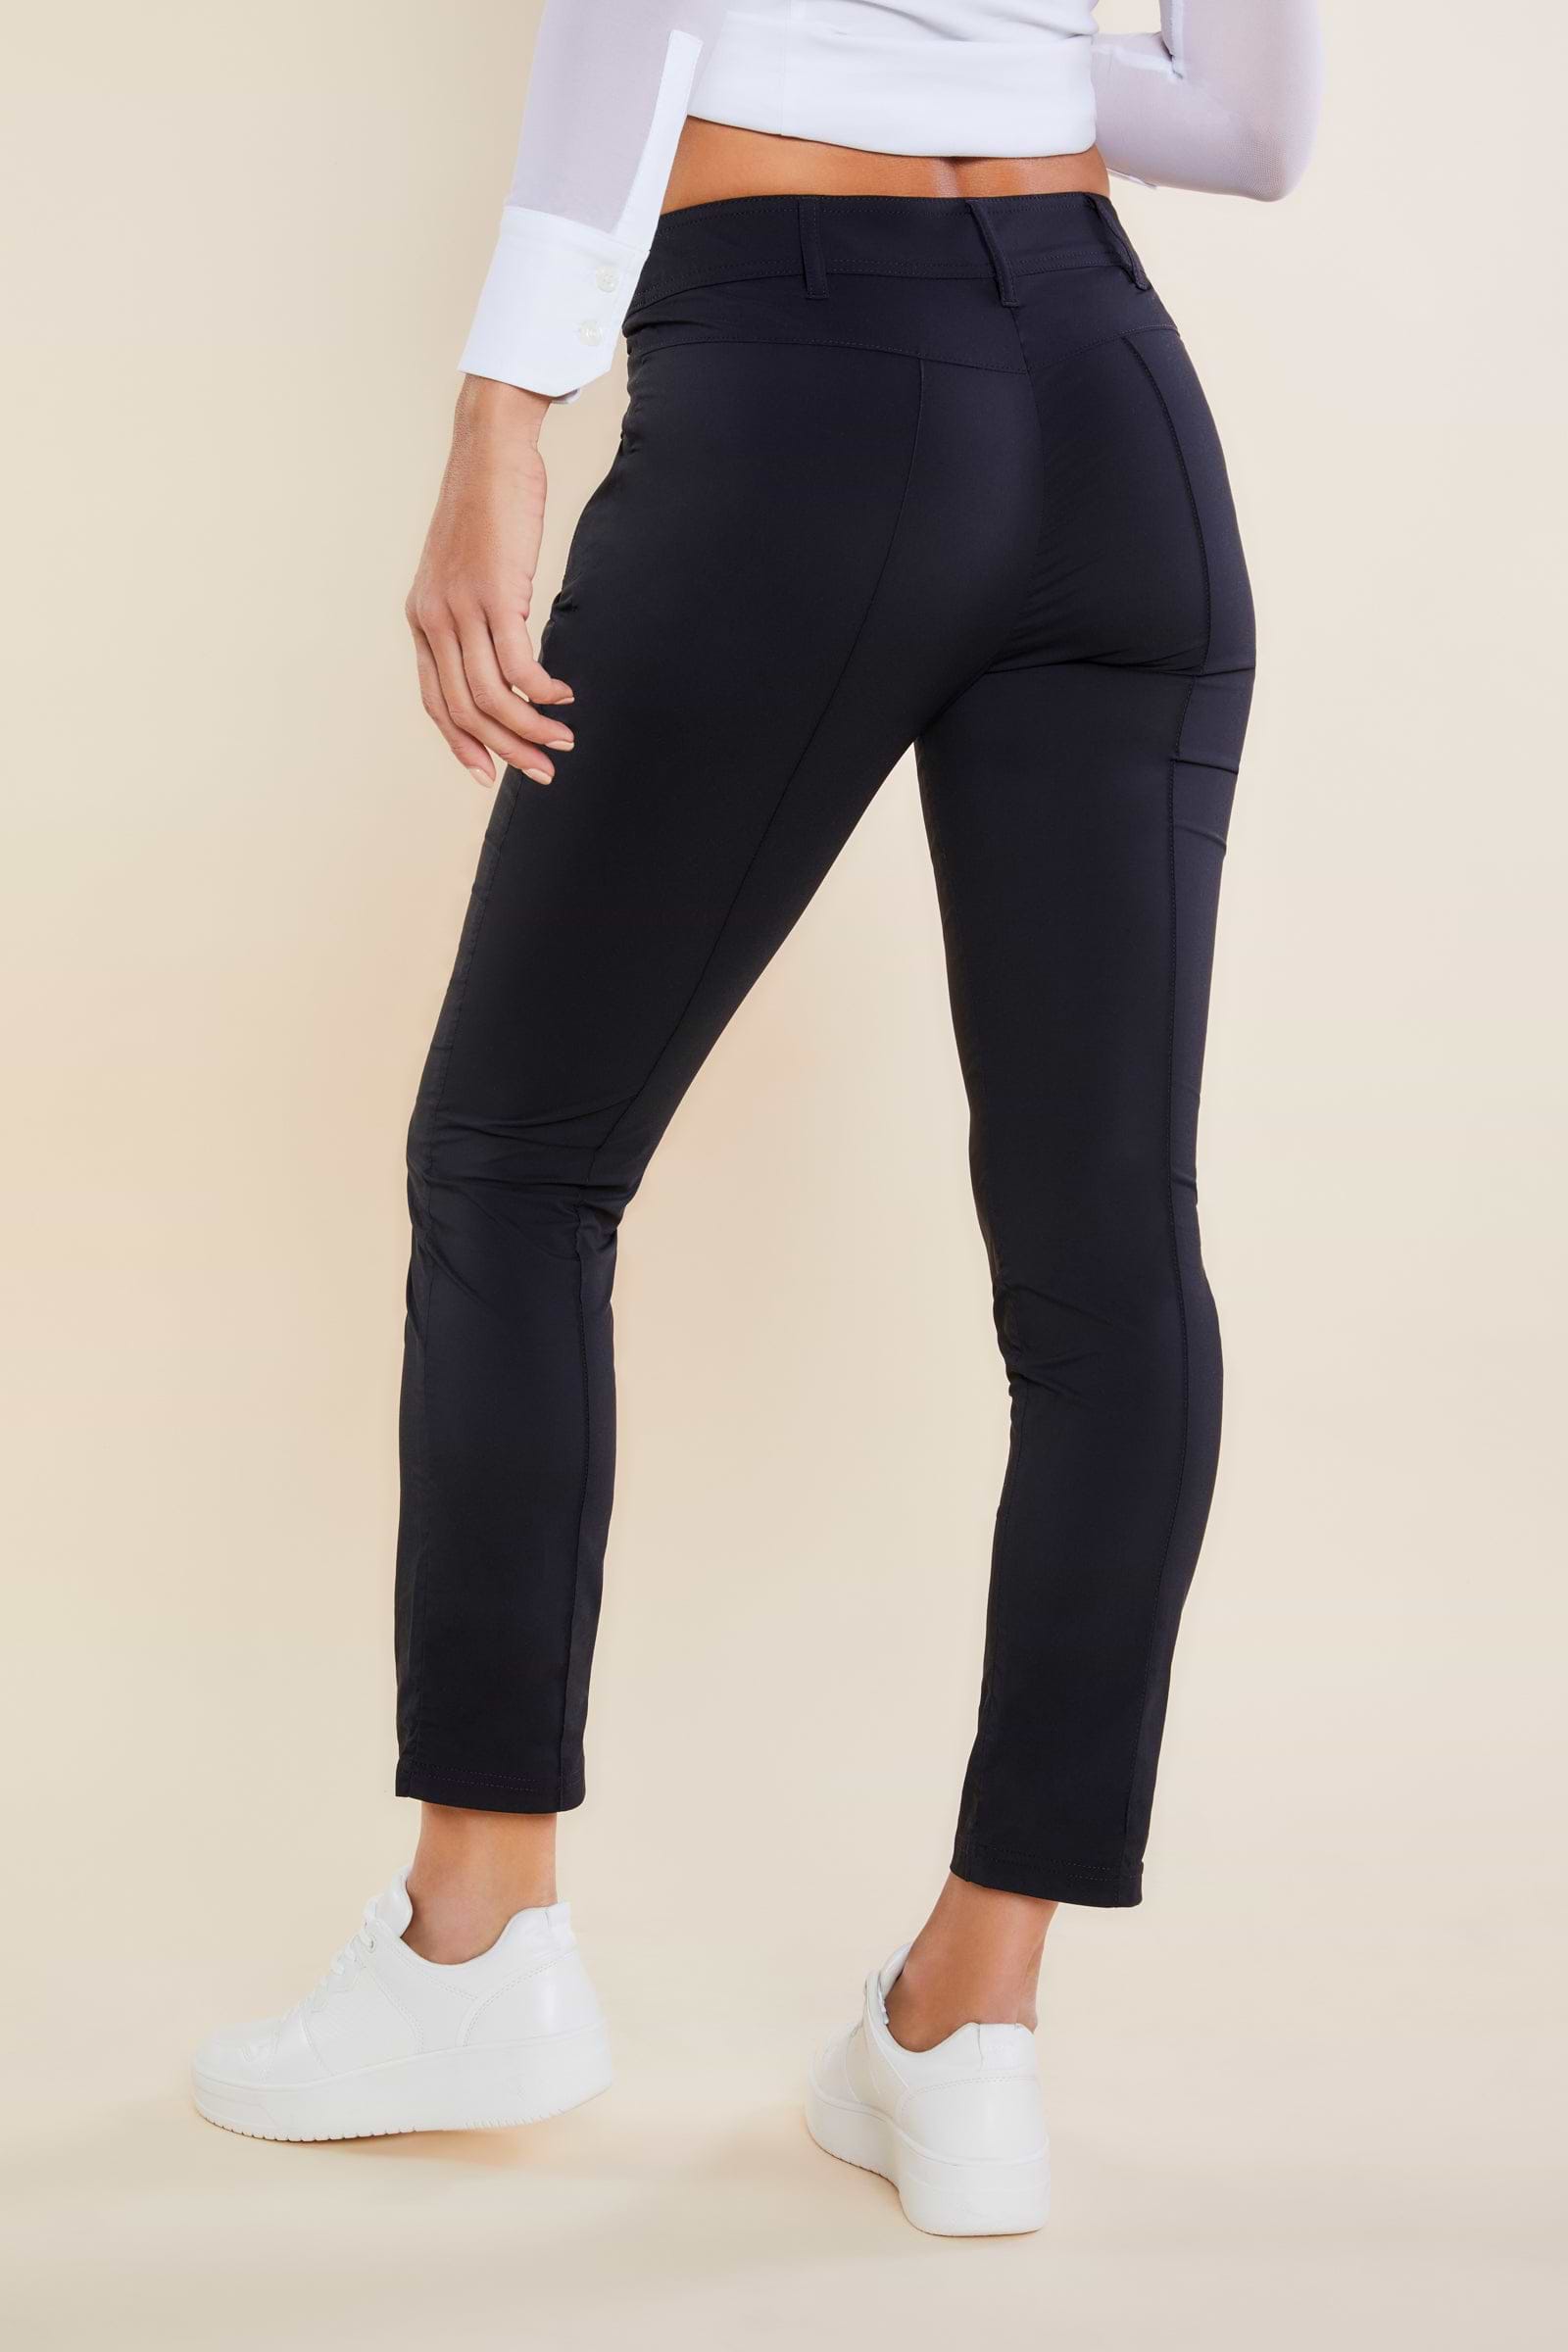 The Best Travel Pants. Back Profile of the Peggy Zippered Pant in Black